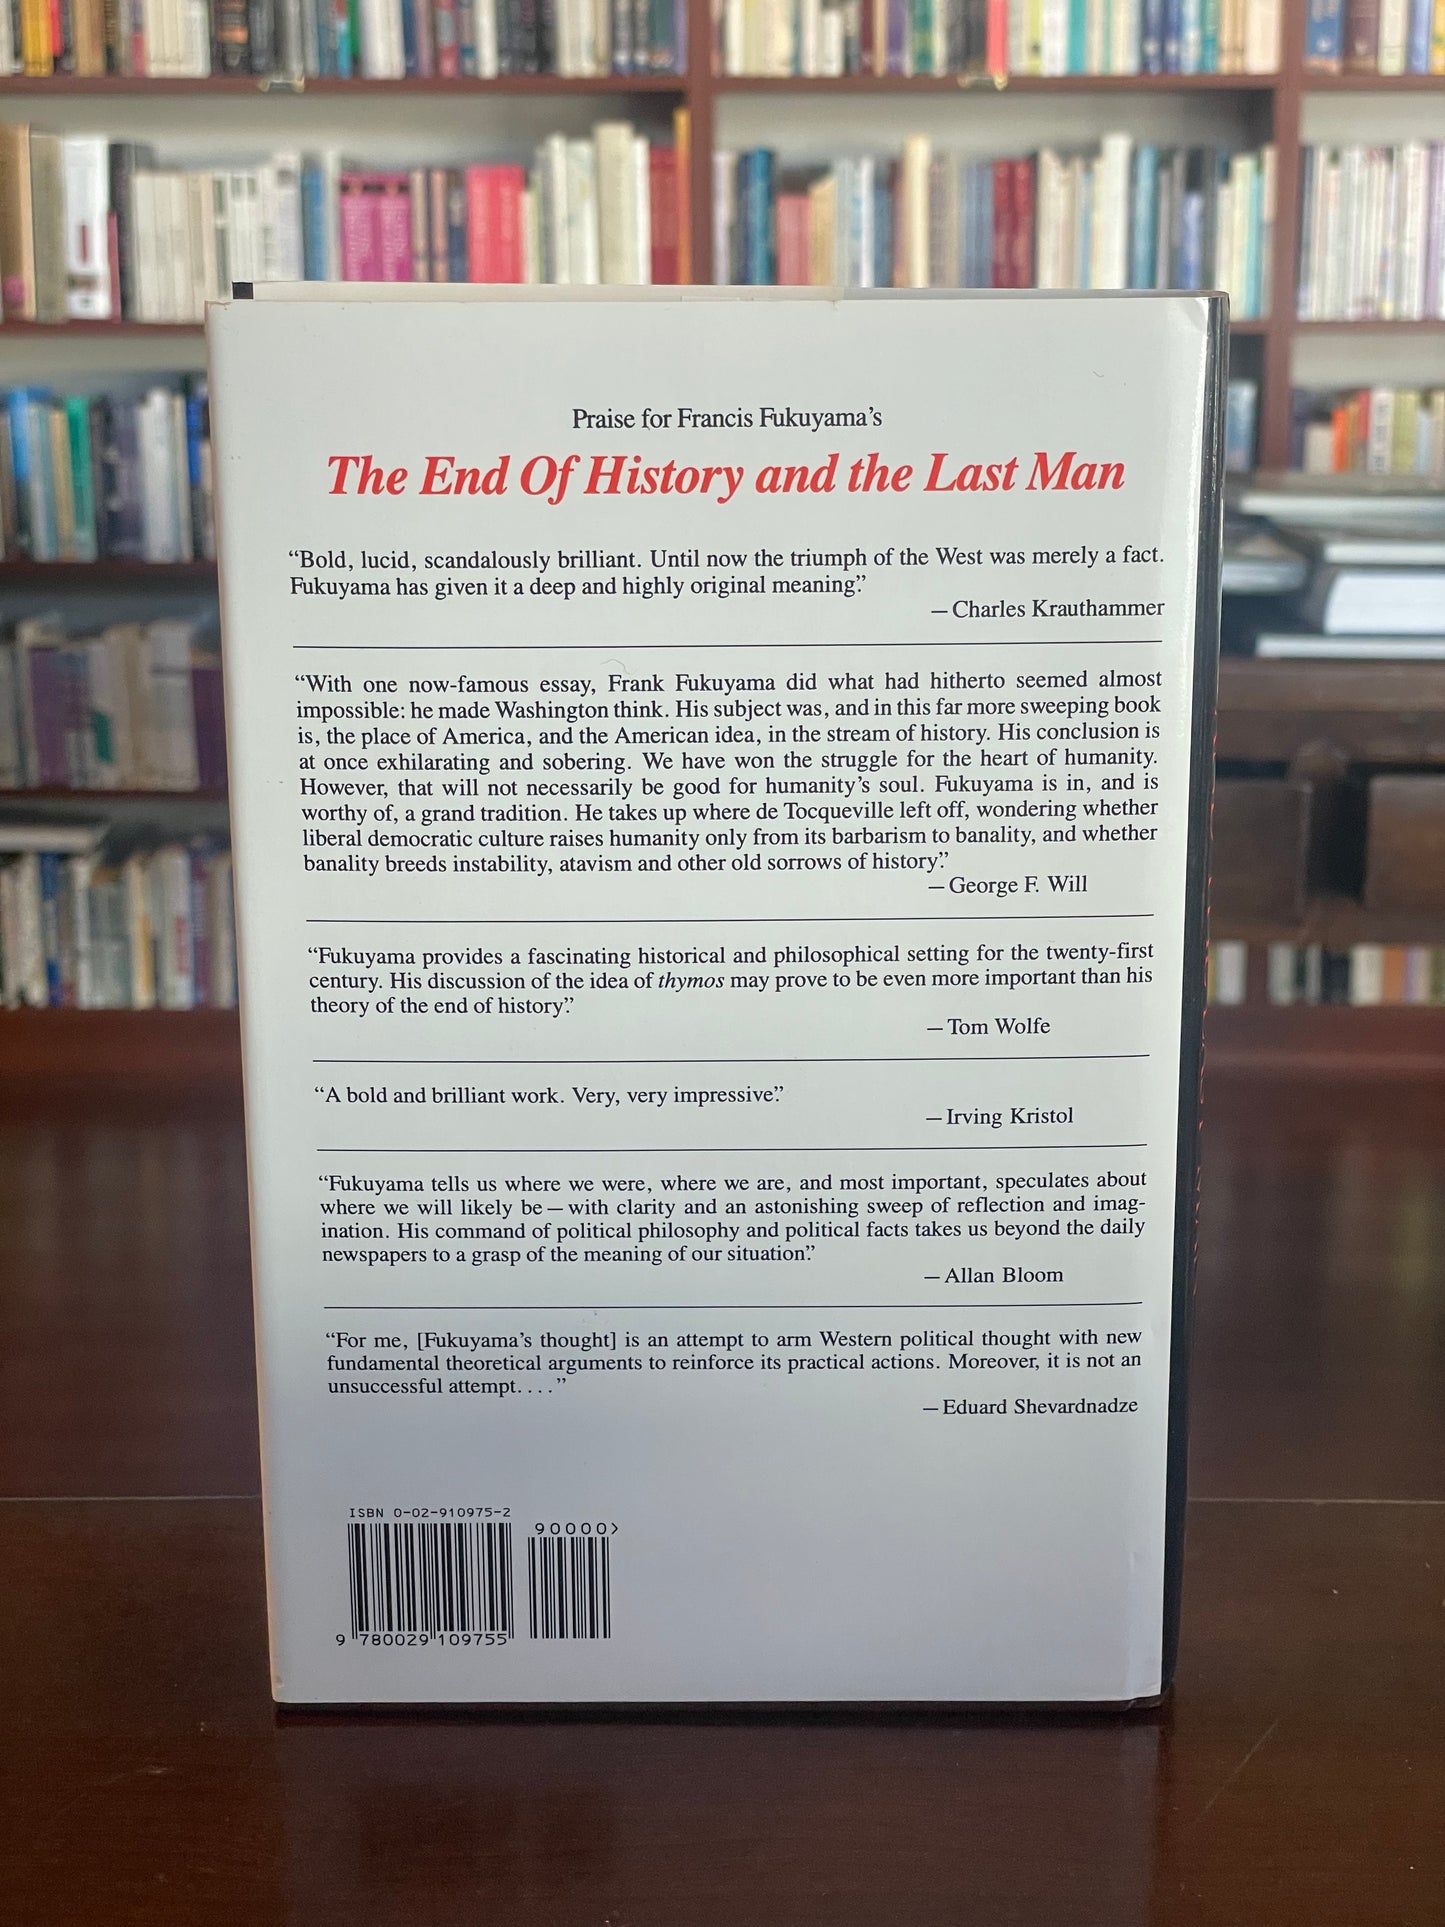 The End of History and The Last Man by Francis Fukuyama (First Edition)